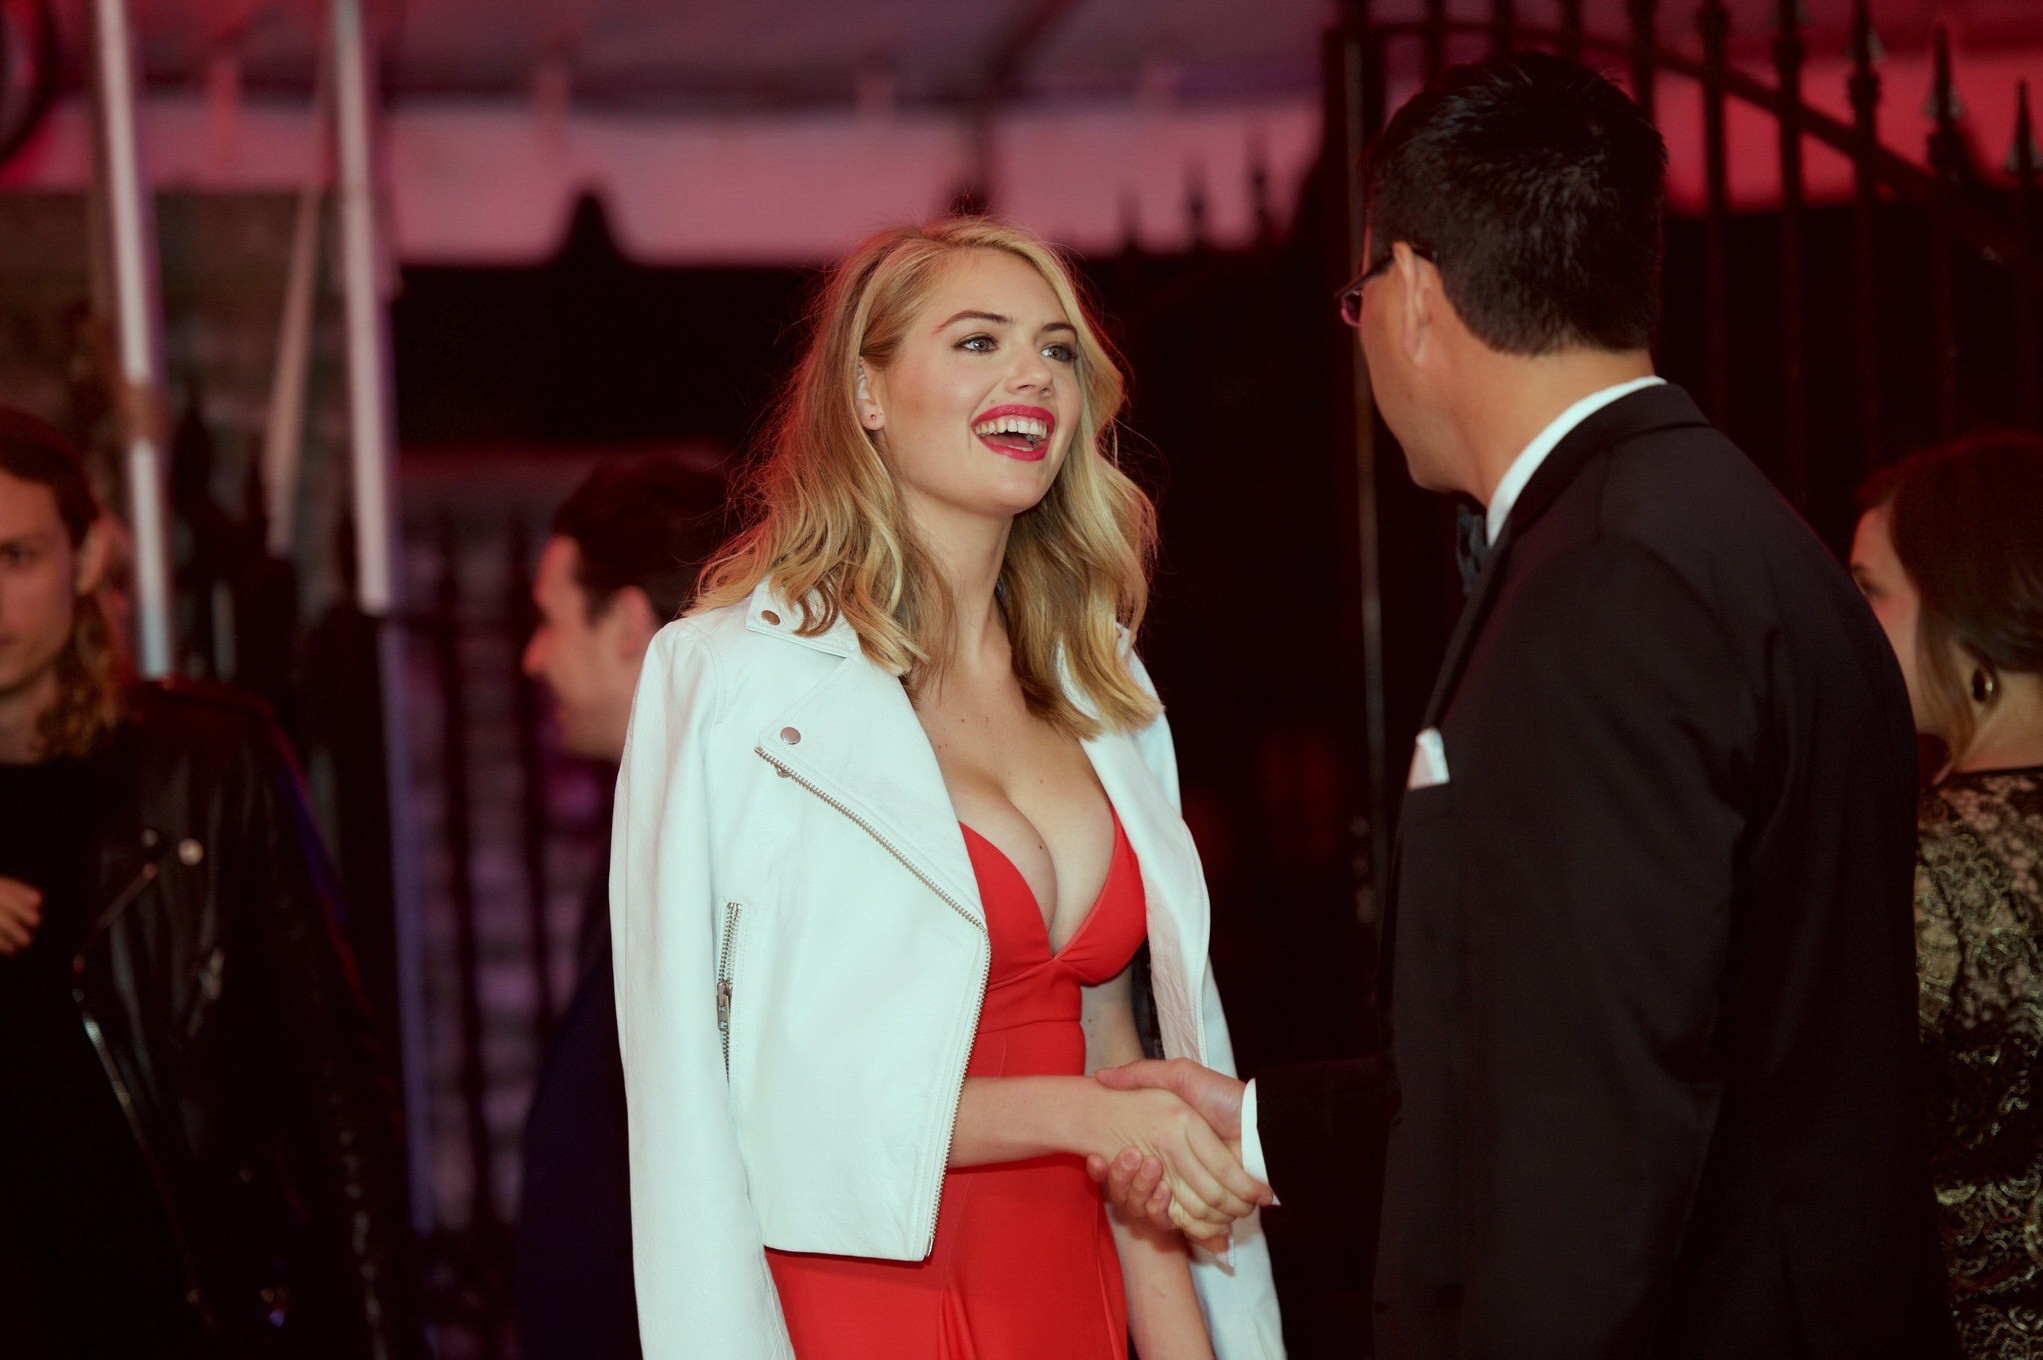 Kate Upton shows off her big boobs in a plunging red dress #75140603